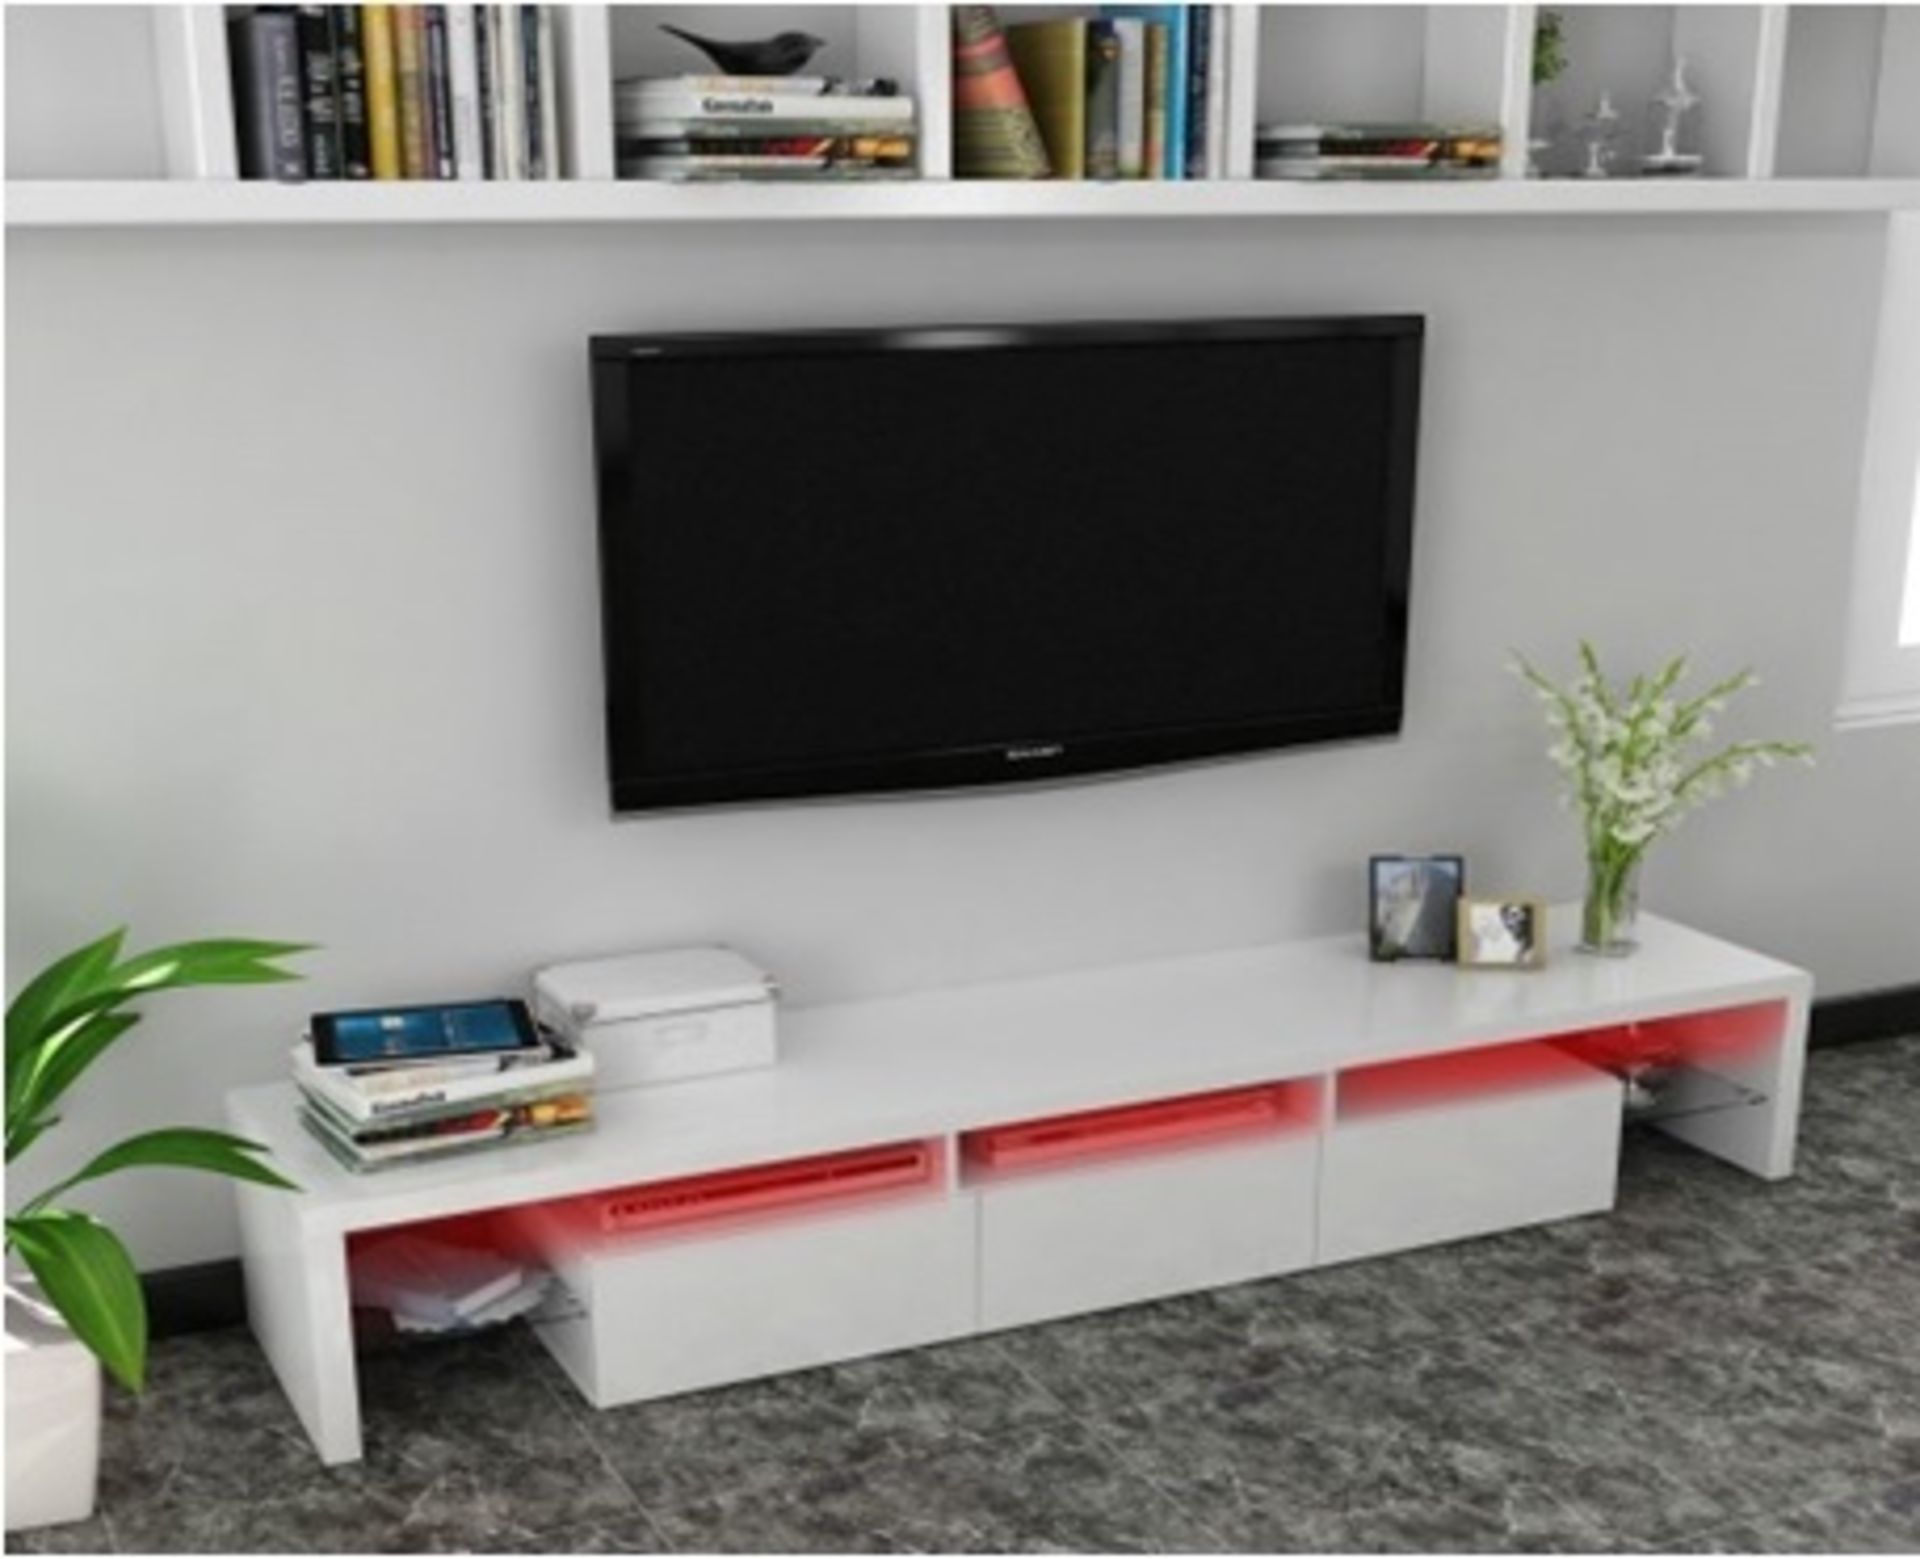 1 x White Glossy MDF TV Stand with Colour Changing LED Lights (Brand New & Boxed)